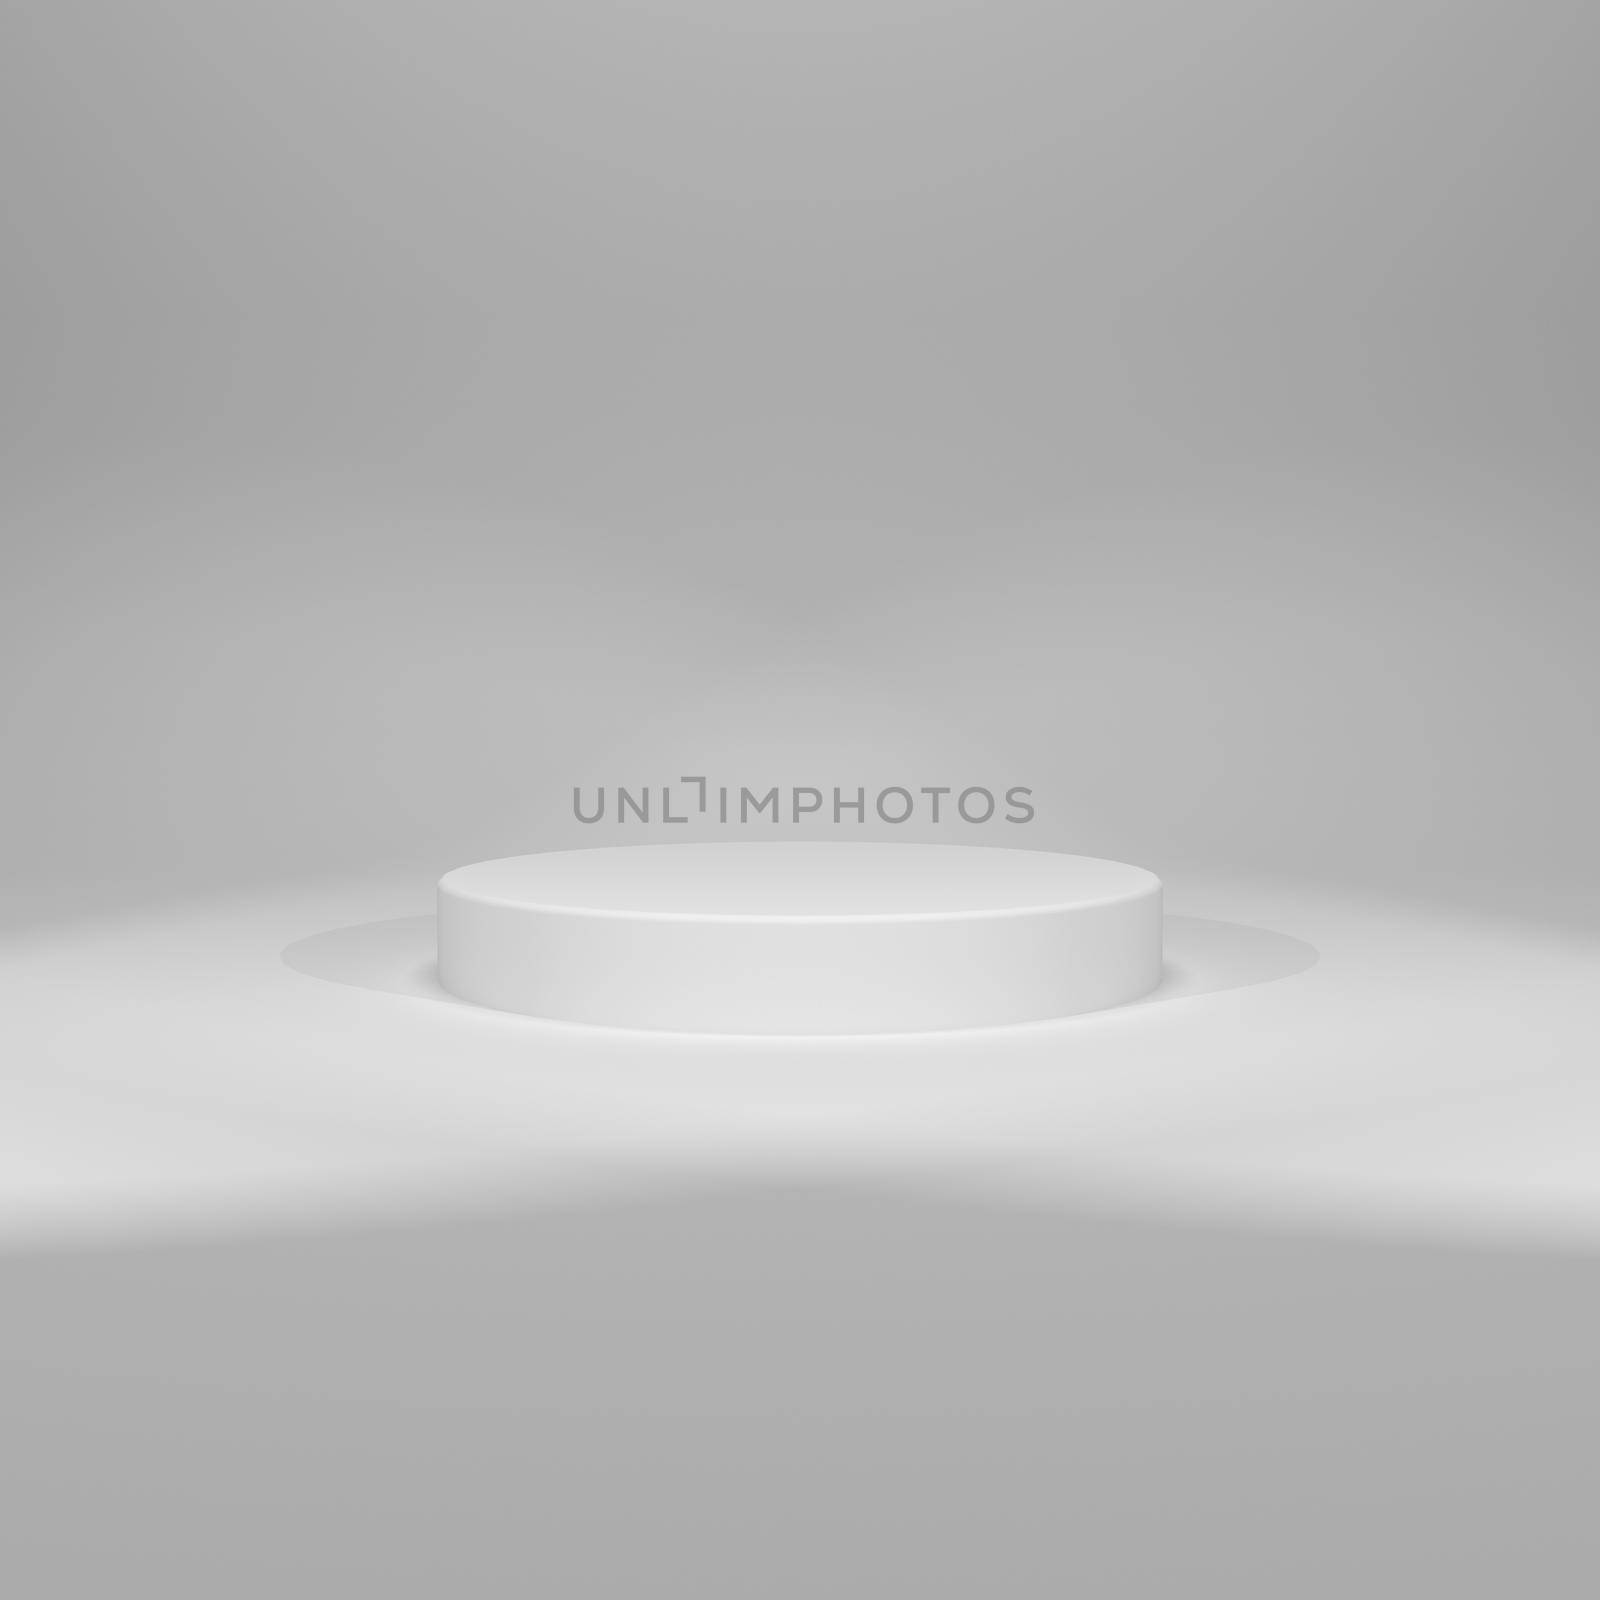 3D rendering of white round pedestal on white background with two spot lights. High resolution illustration